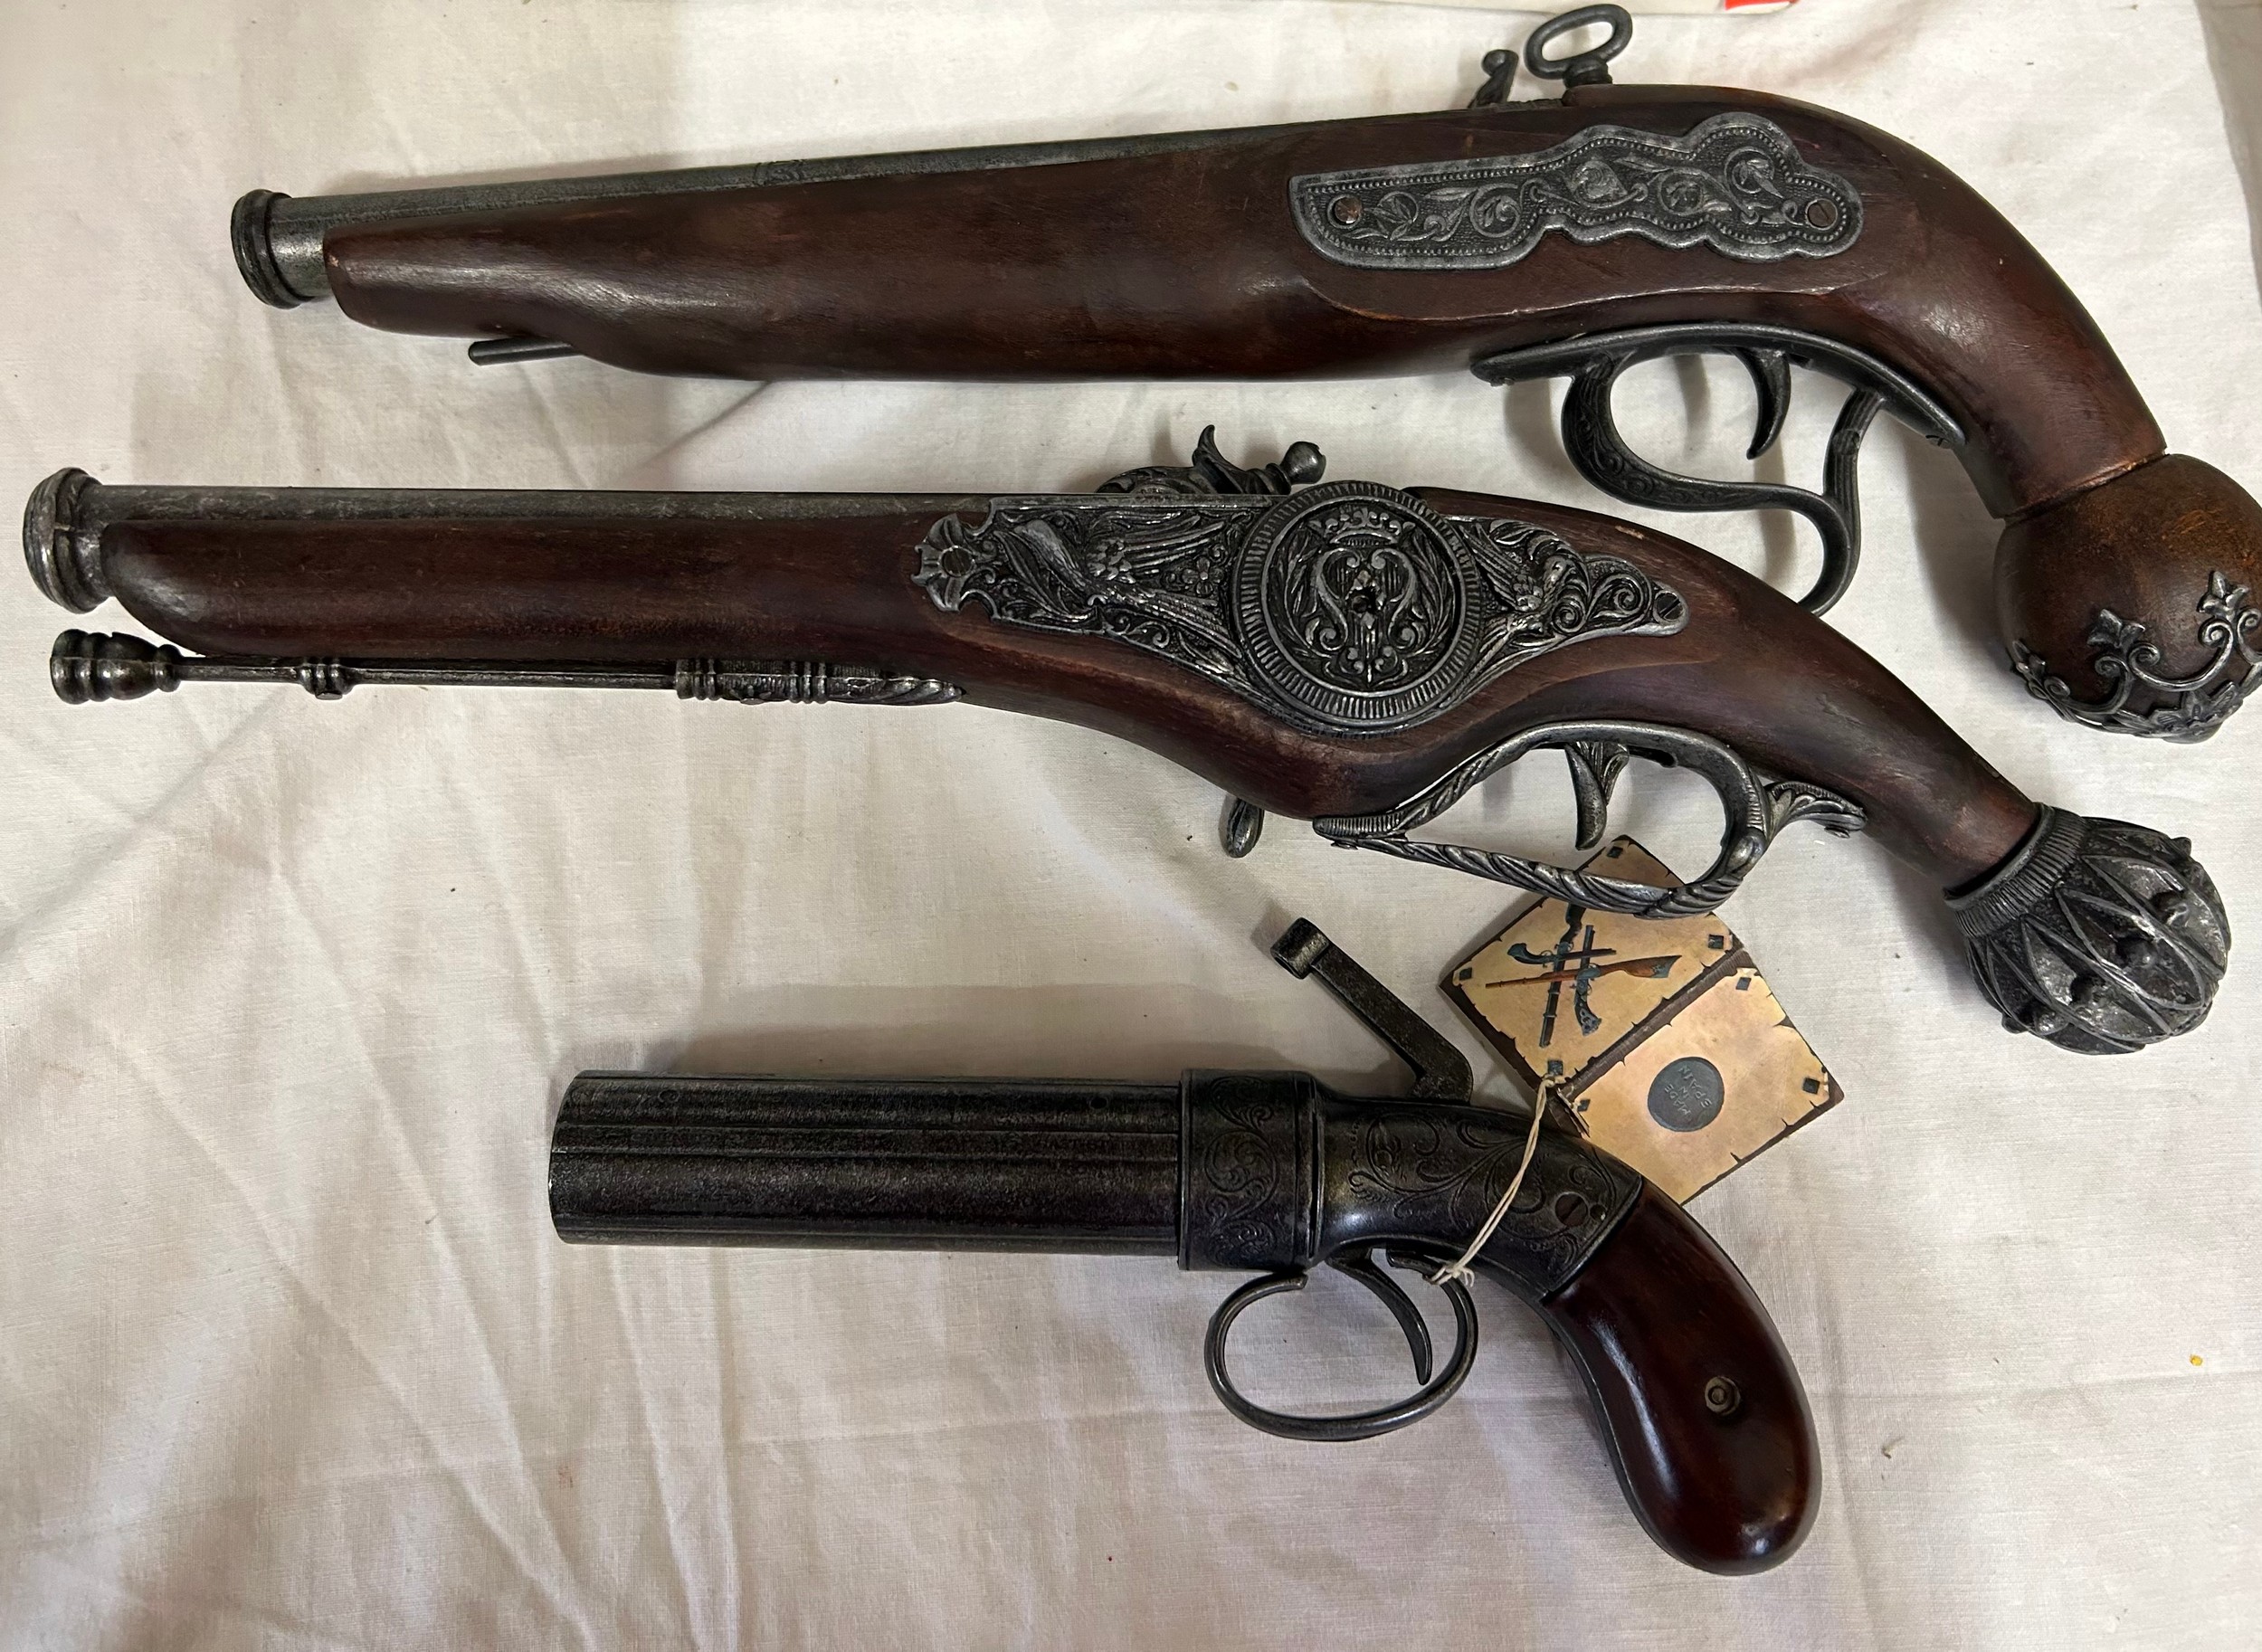 Three boxed antique pistol replicas, made in Spain. - Image 5 of 5